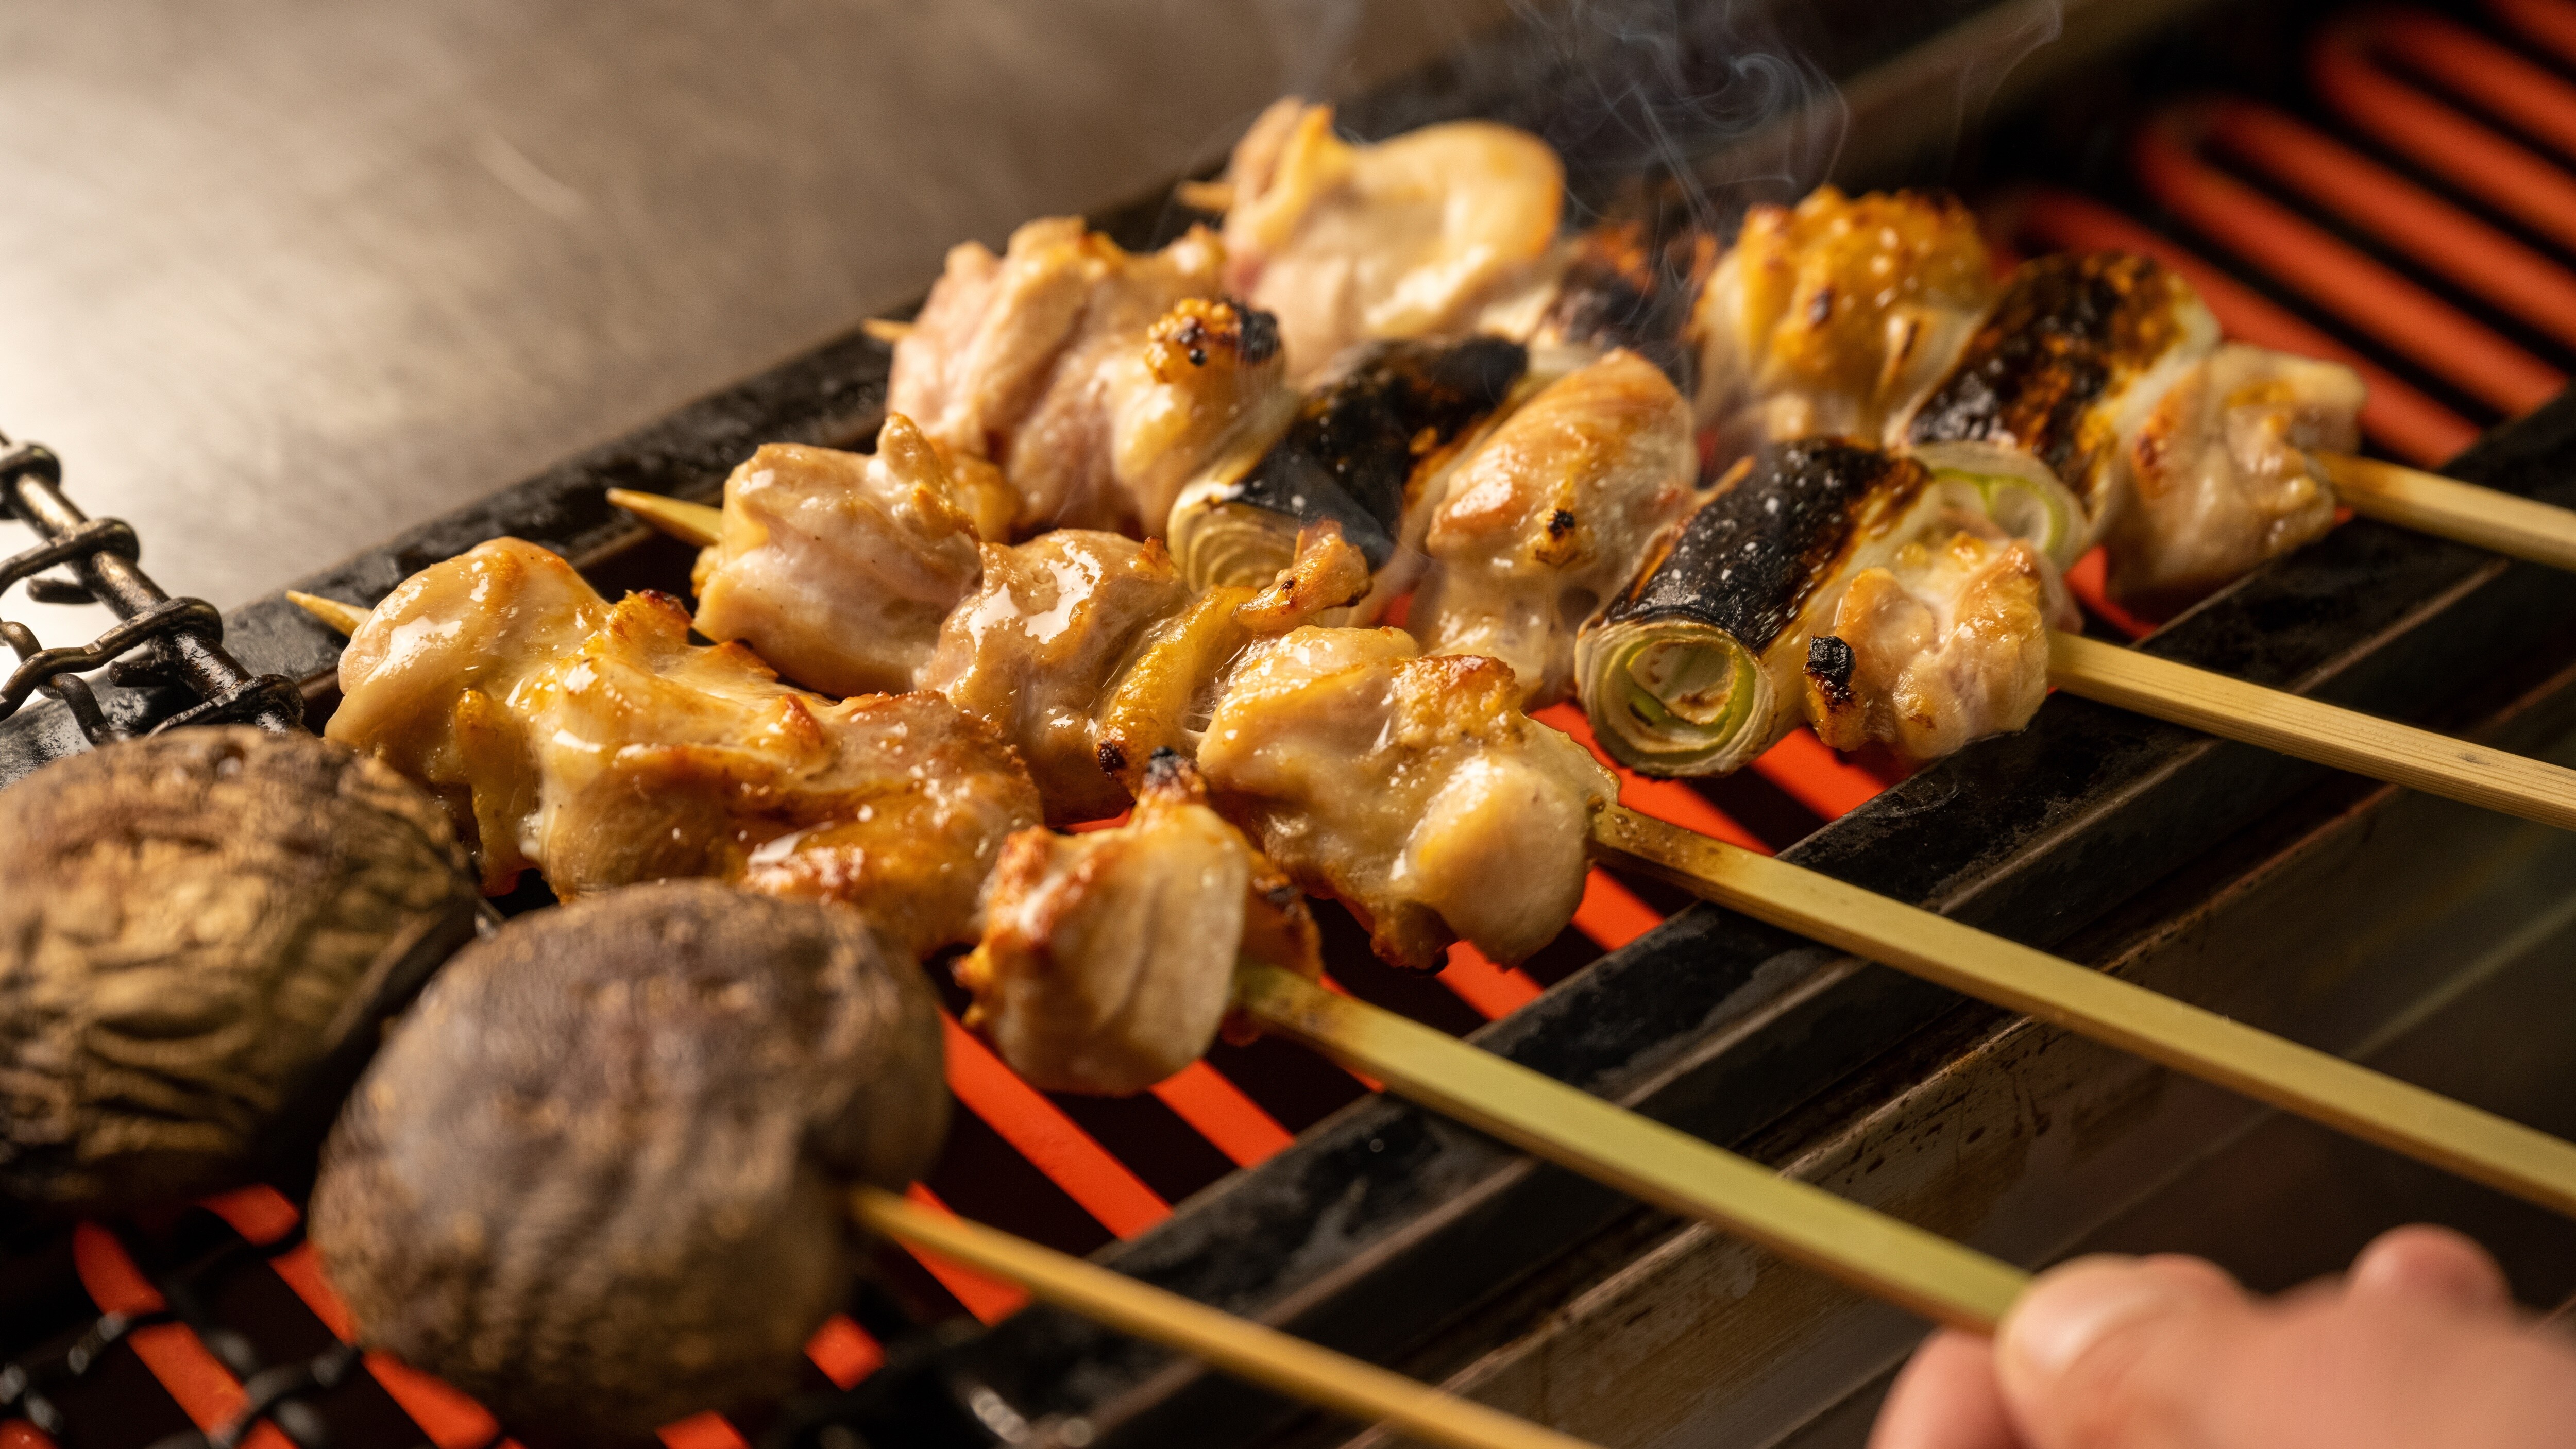 [Supper example] "Gozakura cuisine" We also have a variety of yakitori that are perfect for drinking sake.